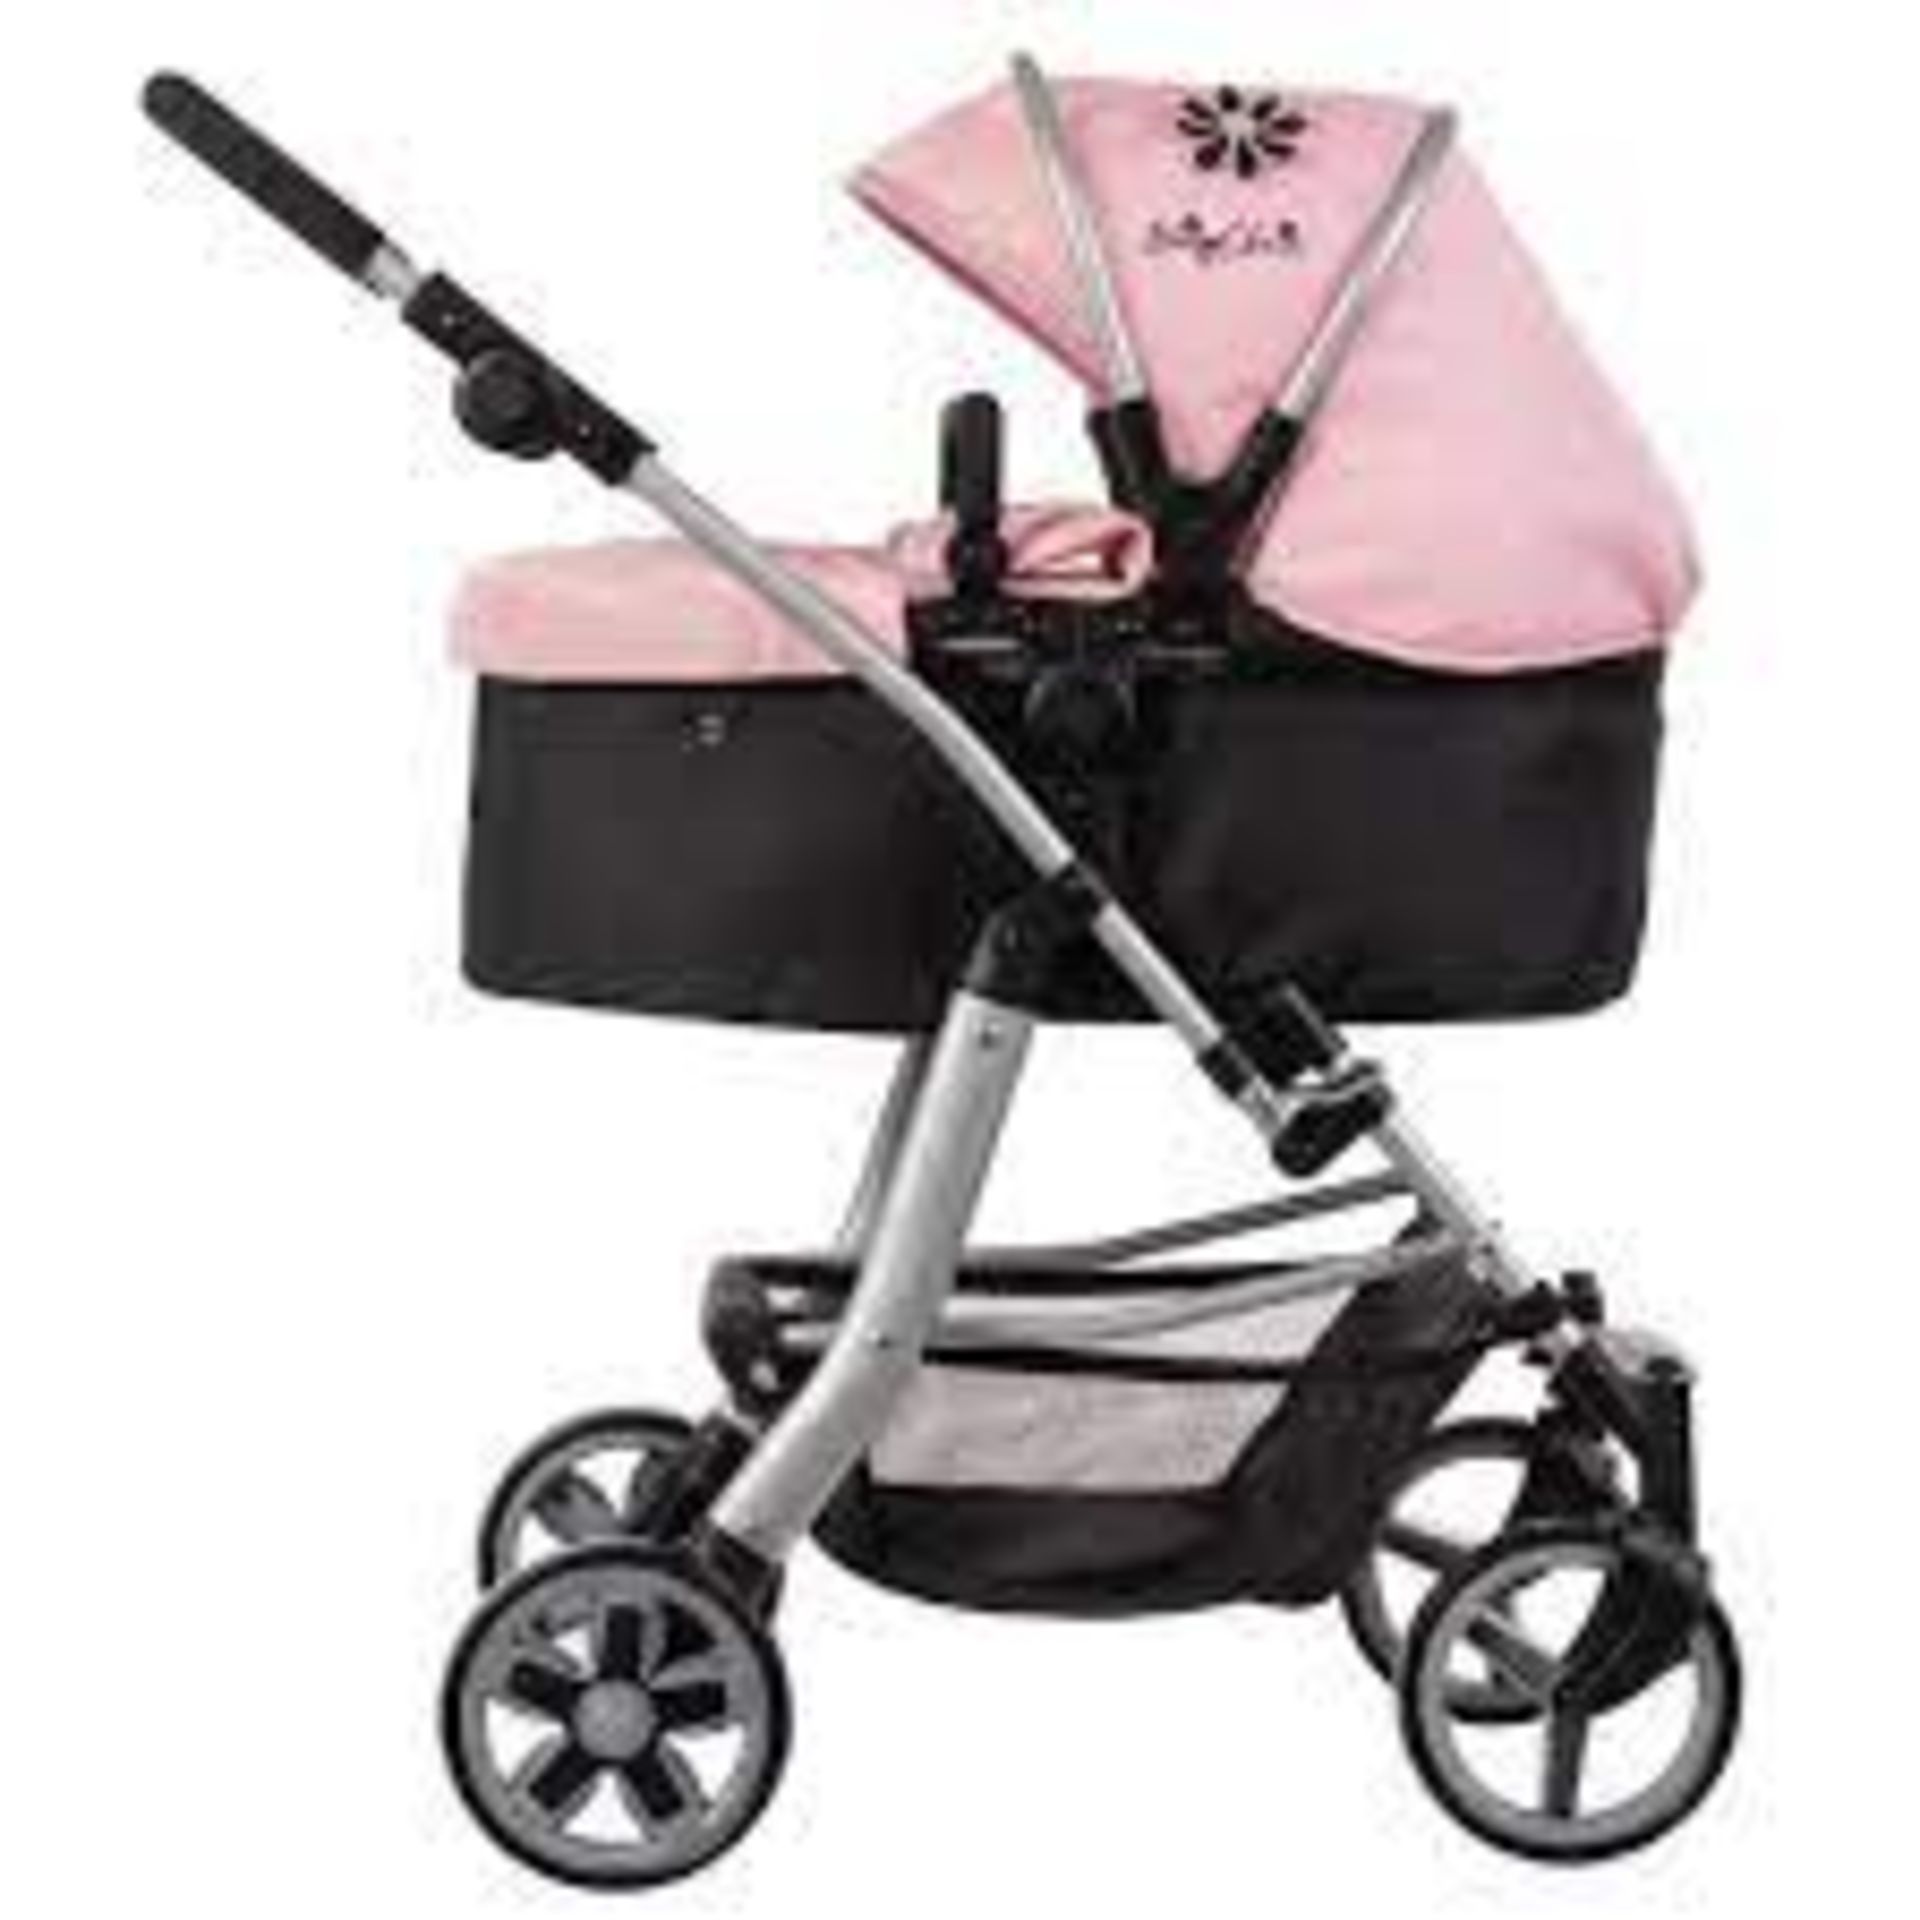 2 X BRAND NEW DIASY CHAIN CONNECT 5 IN 1 DOLLS PRAMS CLASSIC PINK RRP £99 EACH R10